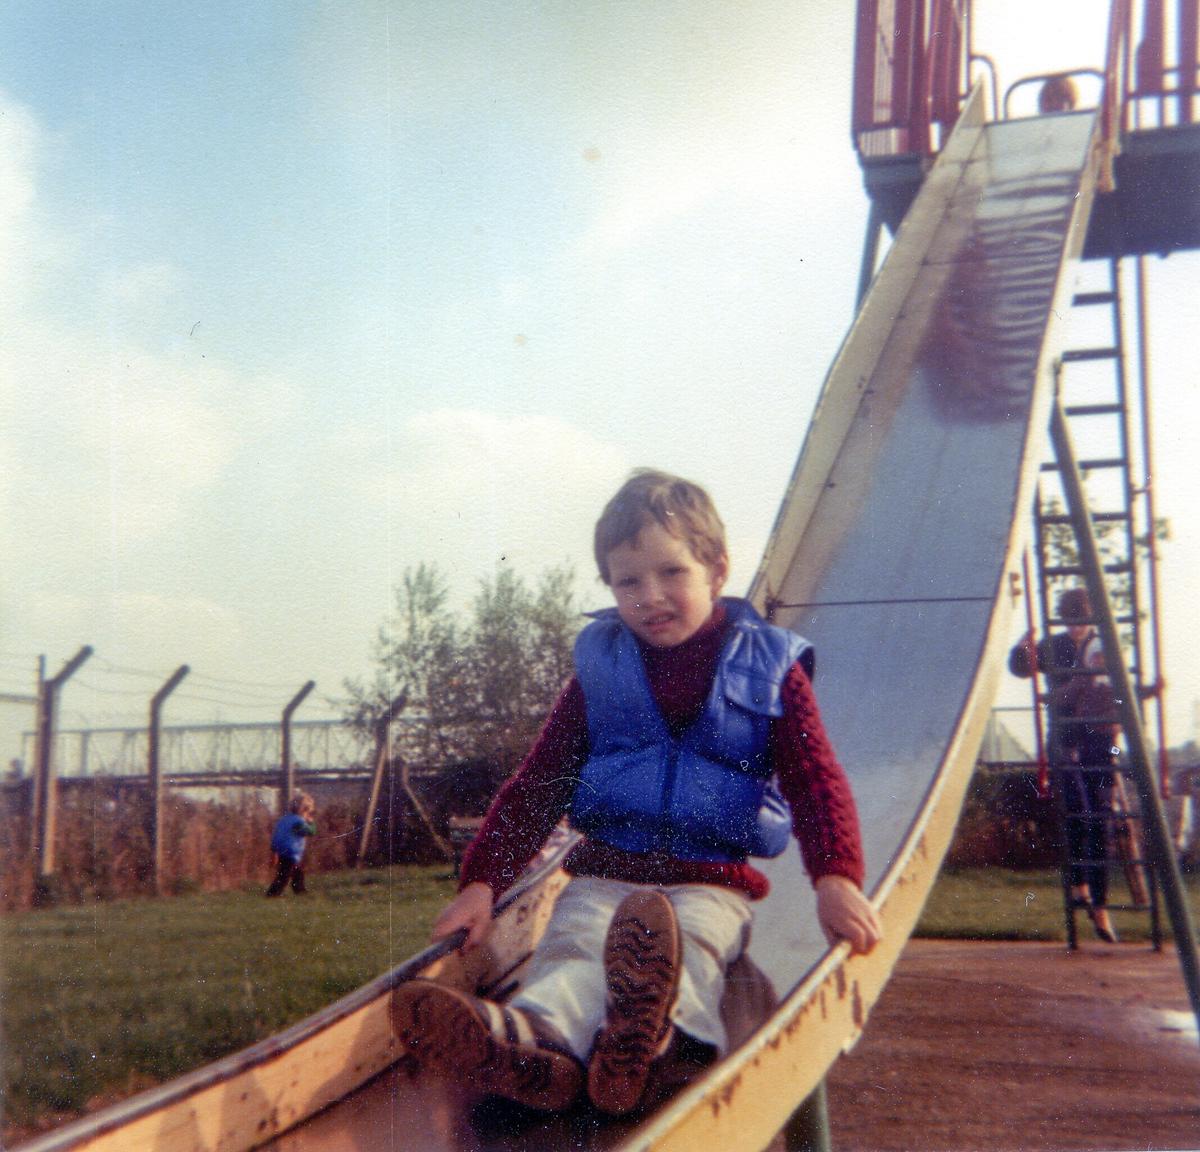 Jamie Hull as a 6-year-old. (Courtesy of <a href="https://www.amazon.co.uk/Life-Thread-Fight-Survival-Stronger/dp/B092MSJGMX">Jamie Hull</a>)